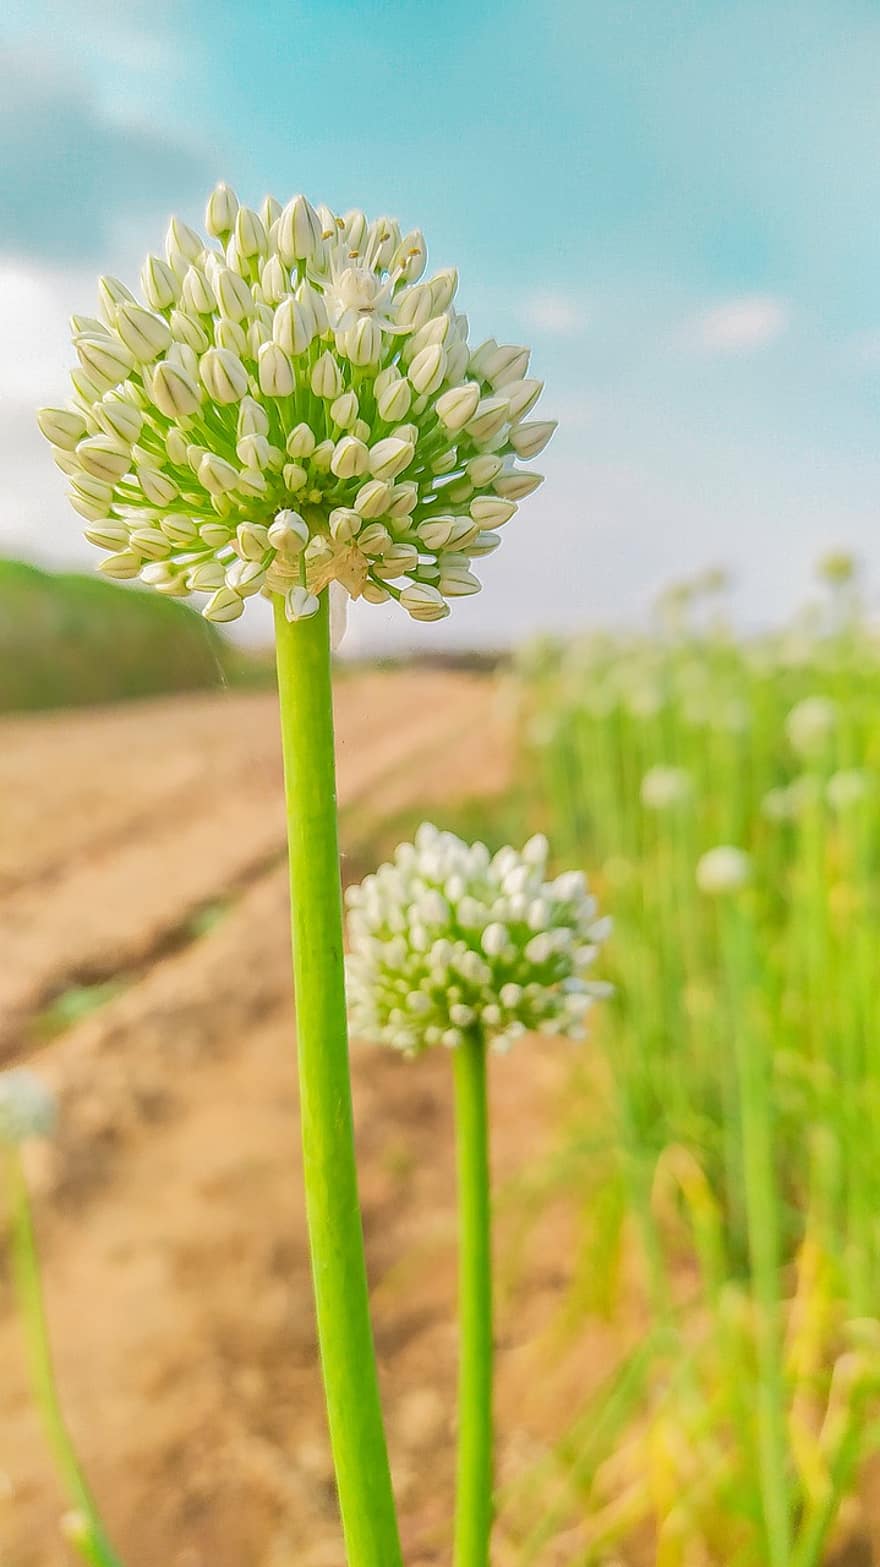 Allium, Flowers, Plant, White Flowers, Buds, Bloom, Spring, Meadow, Nature